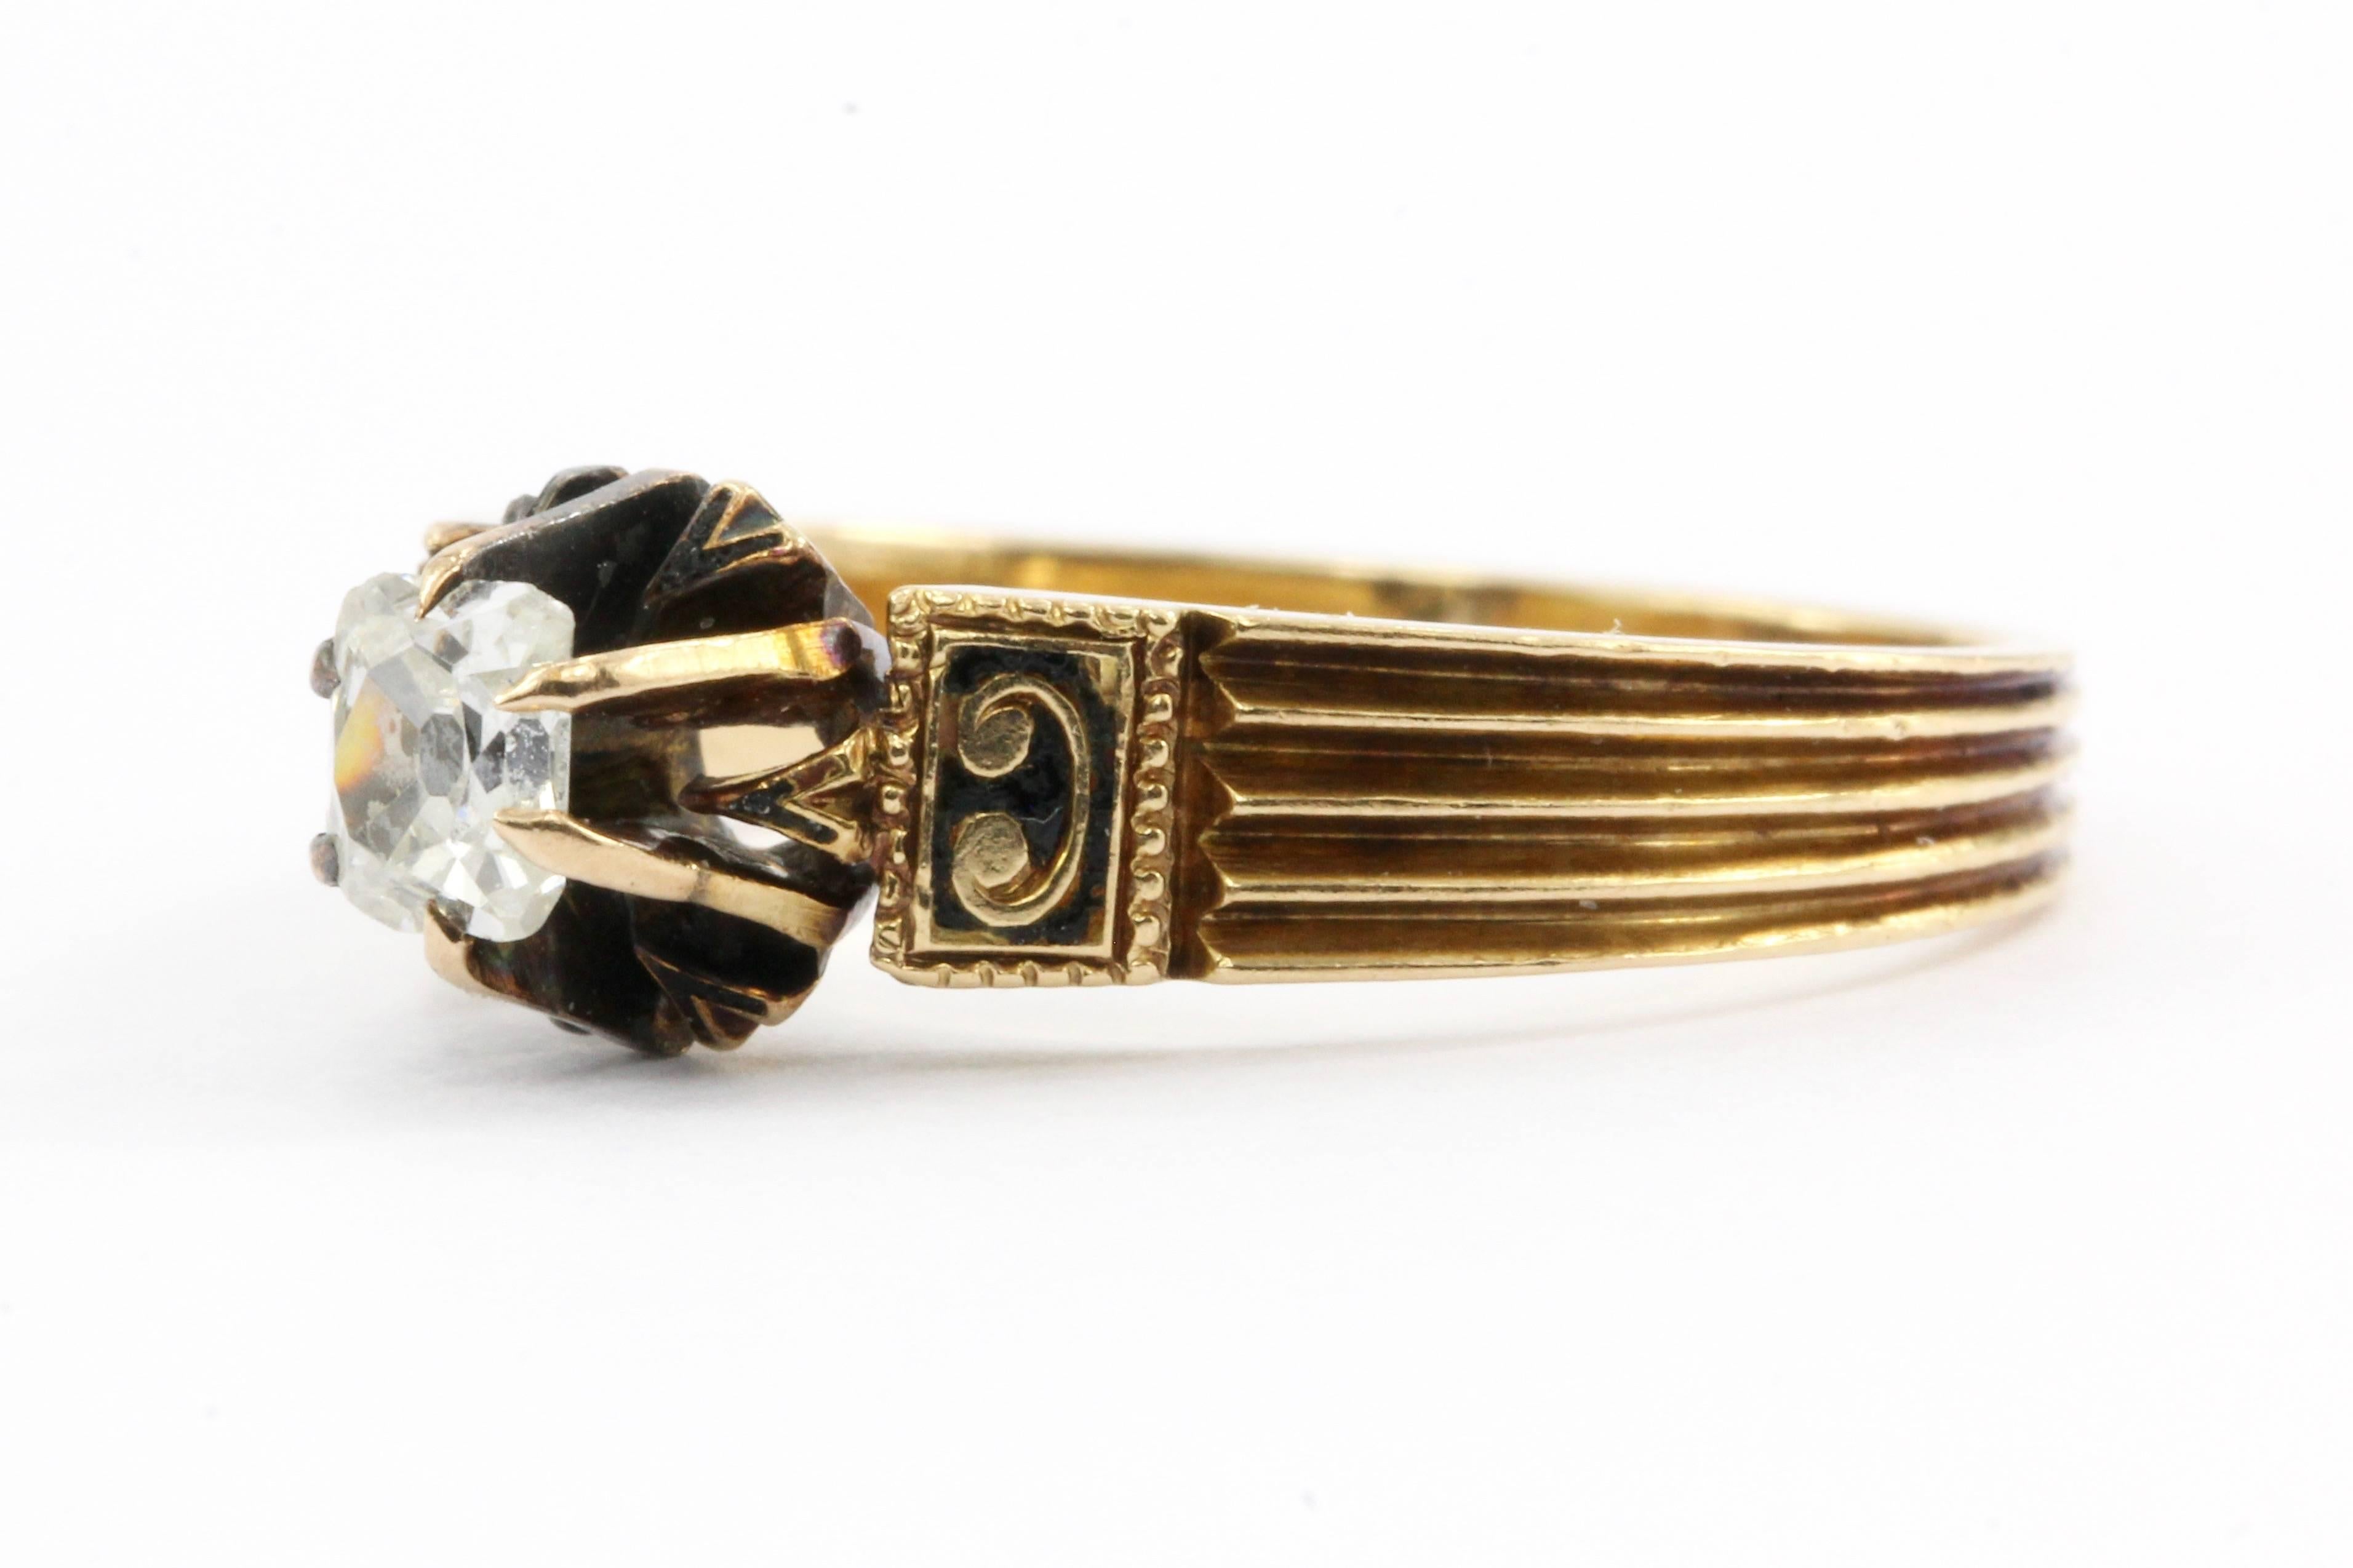 Era: Victorian c.1880

Hallmarks: 18

Composition: 18K Yellow Gold

Primary Stone: Old Mine Cut Diamond

Stone Carat: approximately .25 carat 

Color / Clarity: H / Vs1

Ring Face: 7mm wide

Rise Above Finger: 6.6 mm tall

Ring Size: 6.5

Ring